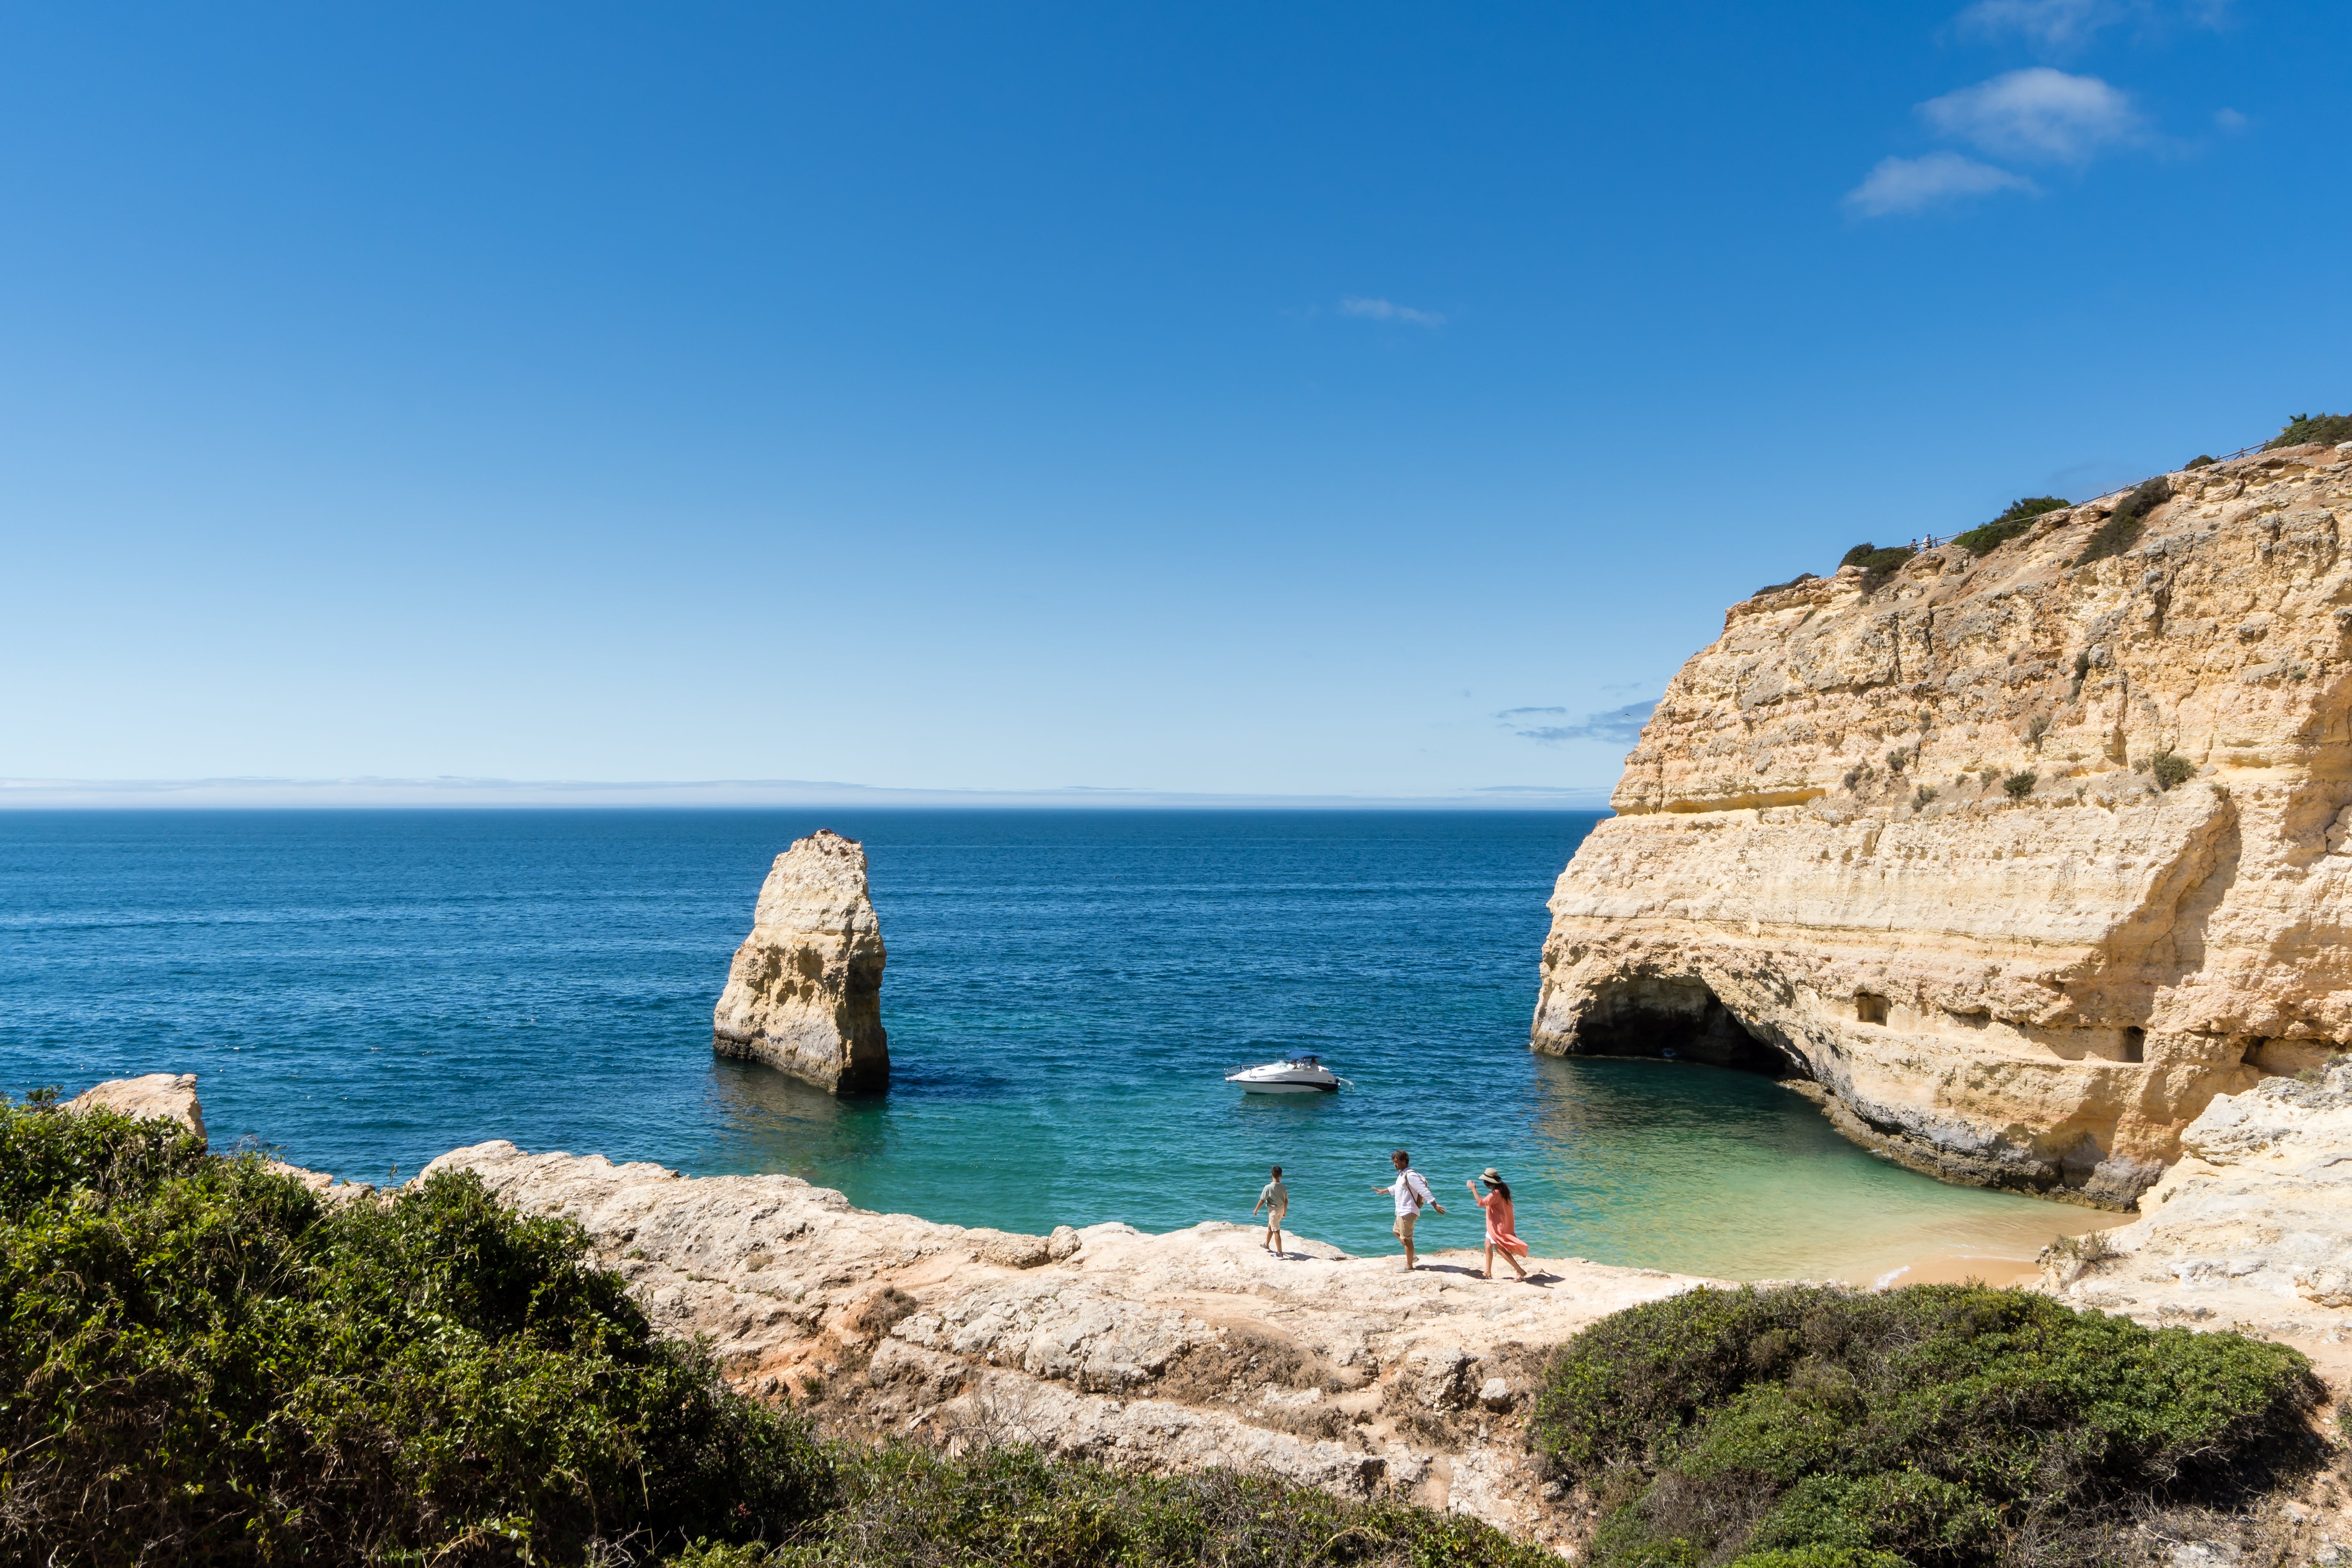 For a truly special break, enjoy a luxurious stay with stunning sea views in the Algarve